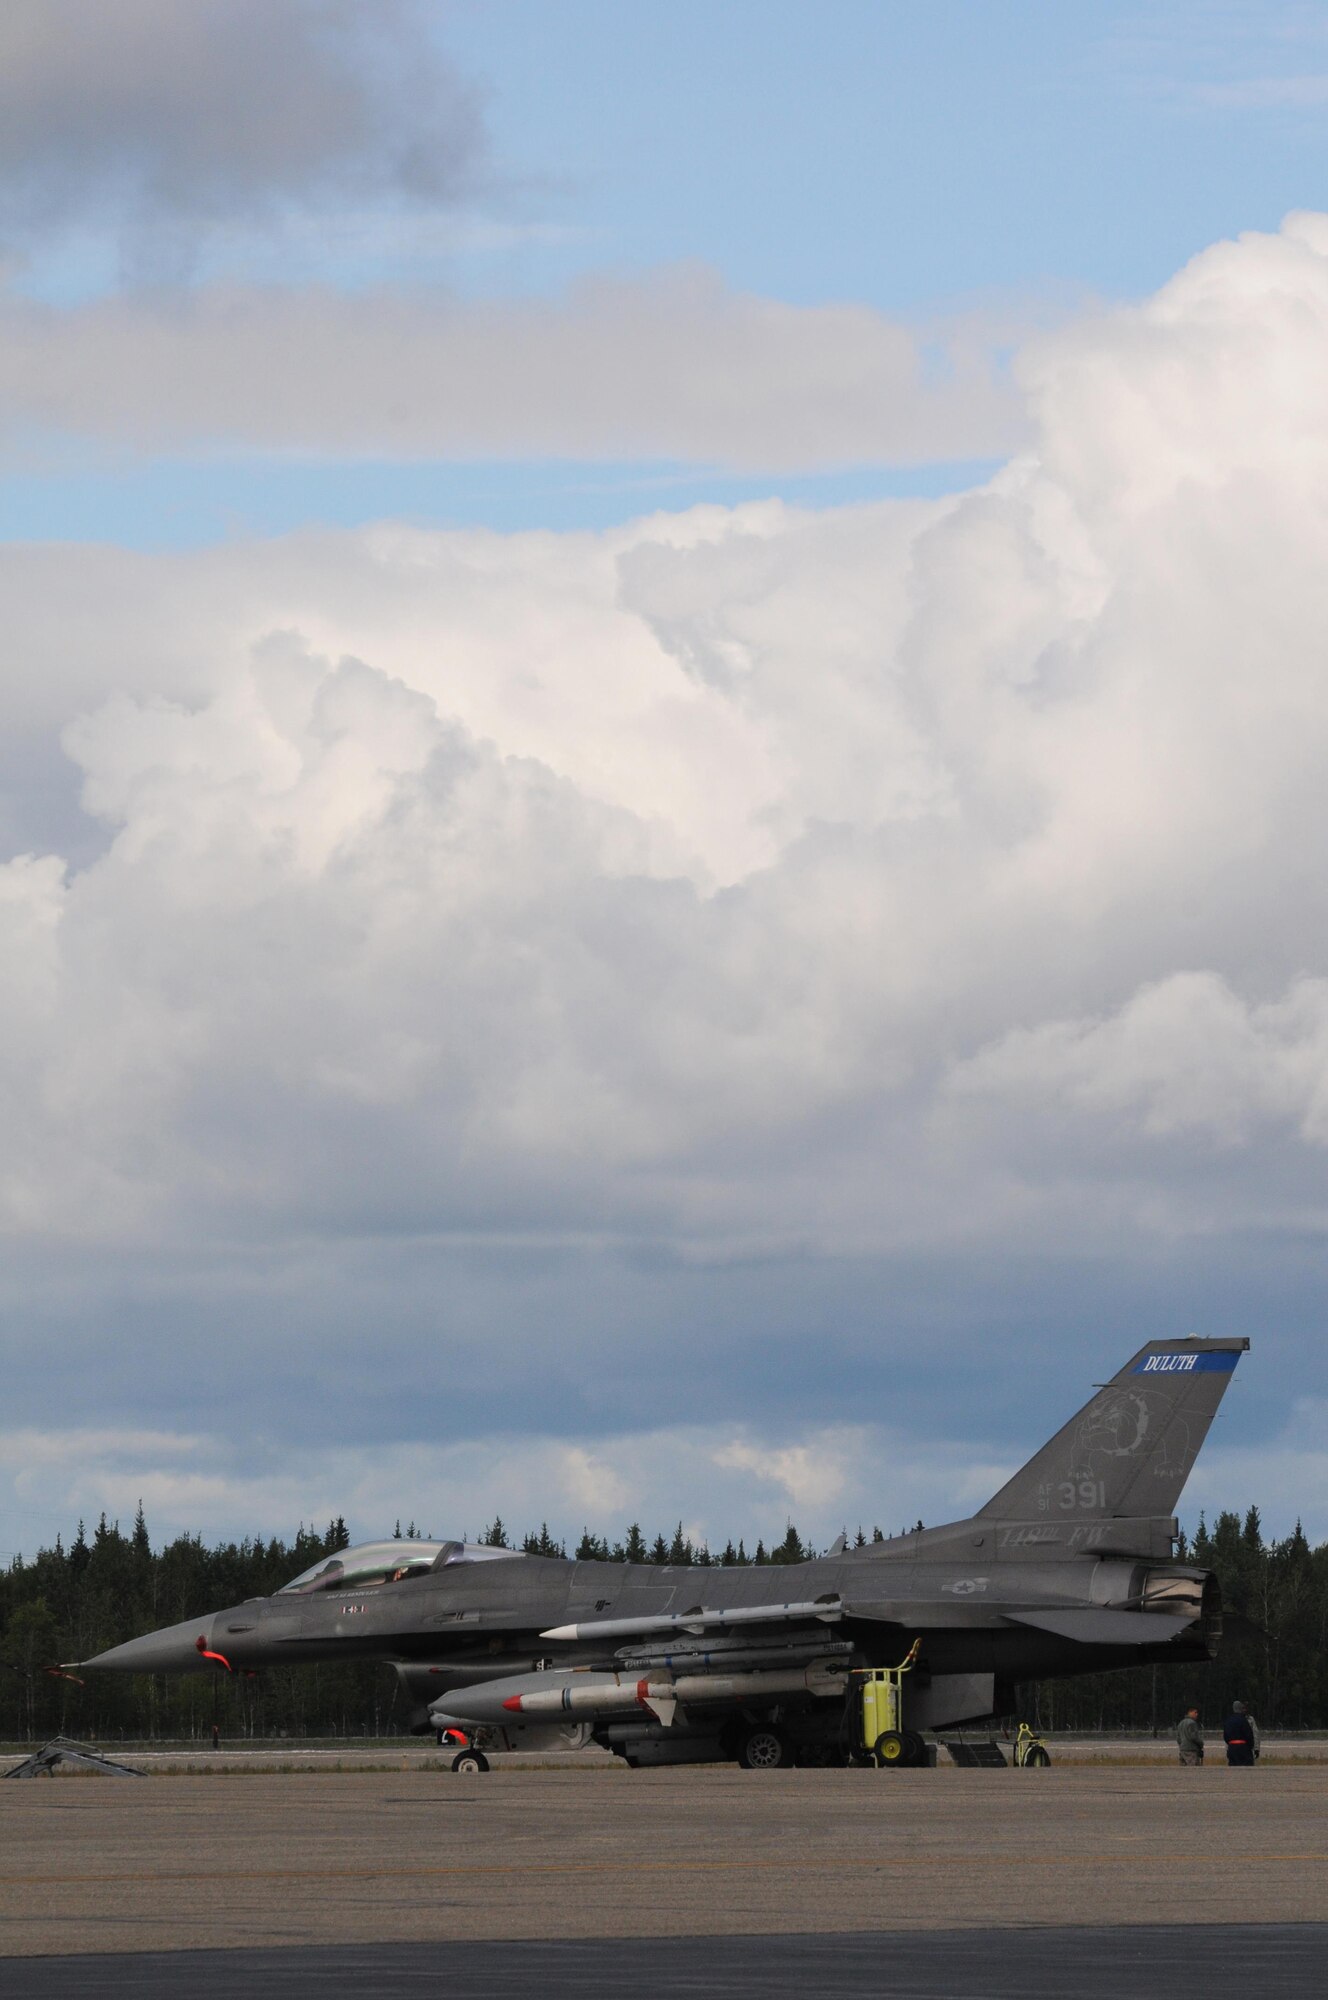 A U.S. Air Force F-16 Fighting Falcon from the 148th Fighter Wing, Duluth, Minn., is parked on the ramp at Eielson Air Force Base, Alaska, Aug 11, 2015, during RED FLAG-Alaska 15-3.  RF-A is a Pacific Air Forces commander-directed field training exercise for U.S. and partner nation forces, providing combined offensive counter-air, interdiction, close air support and large force employment training in a simulated combat environment.  (U.S. Air Force photo by Master Sgt. Ralph Kapustka/Released)